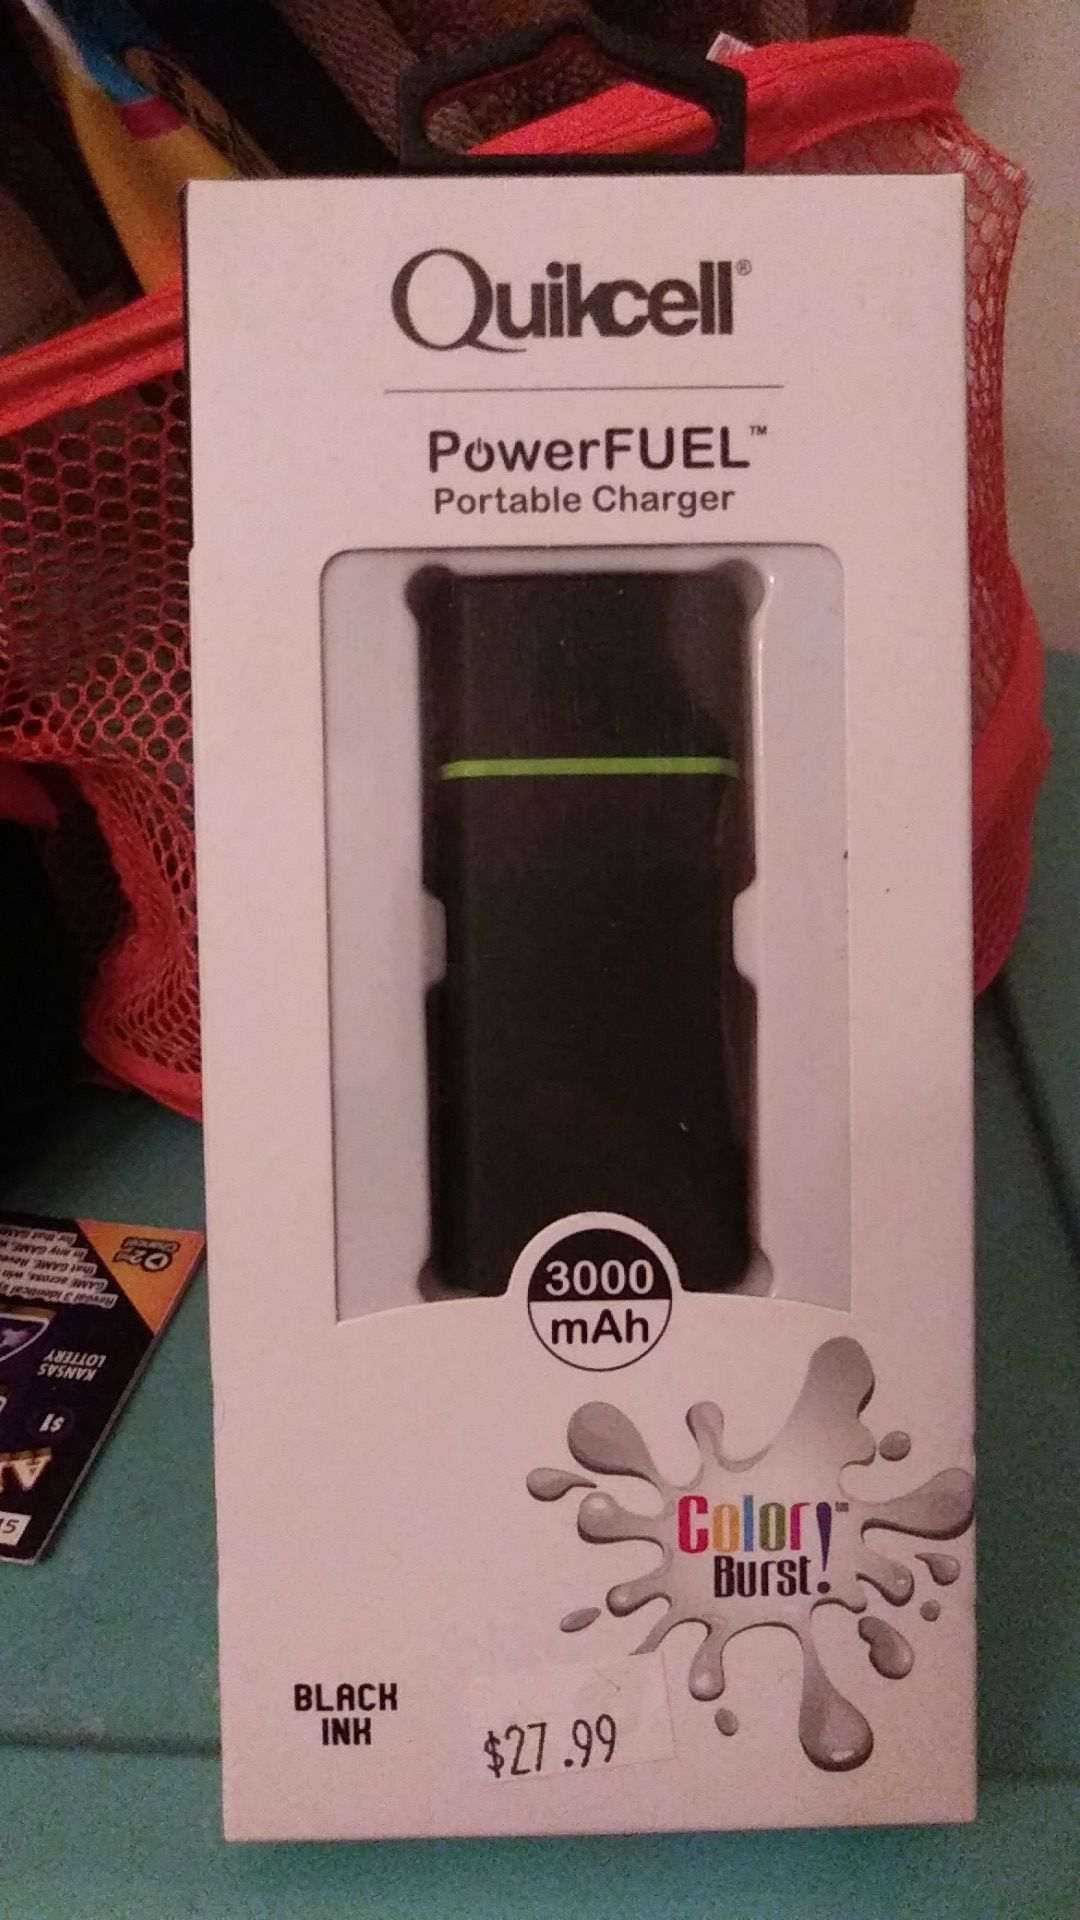 Quikcell portable charger